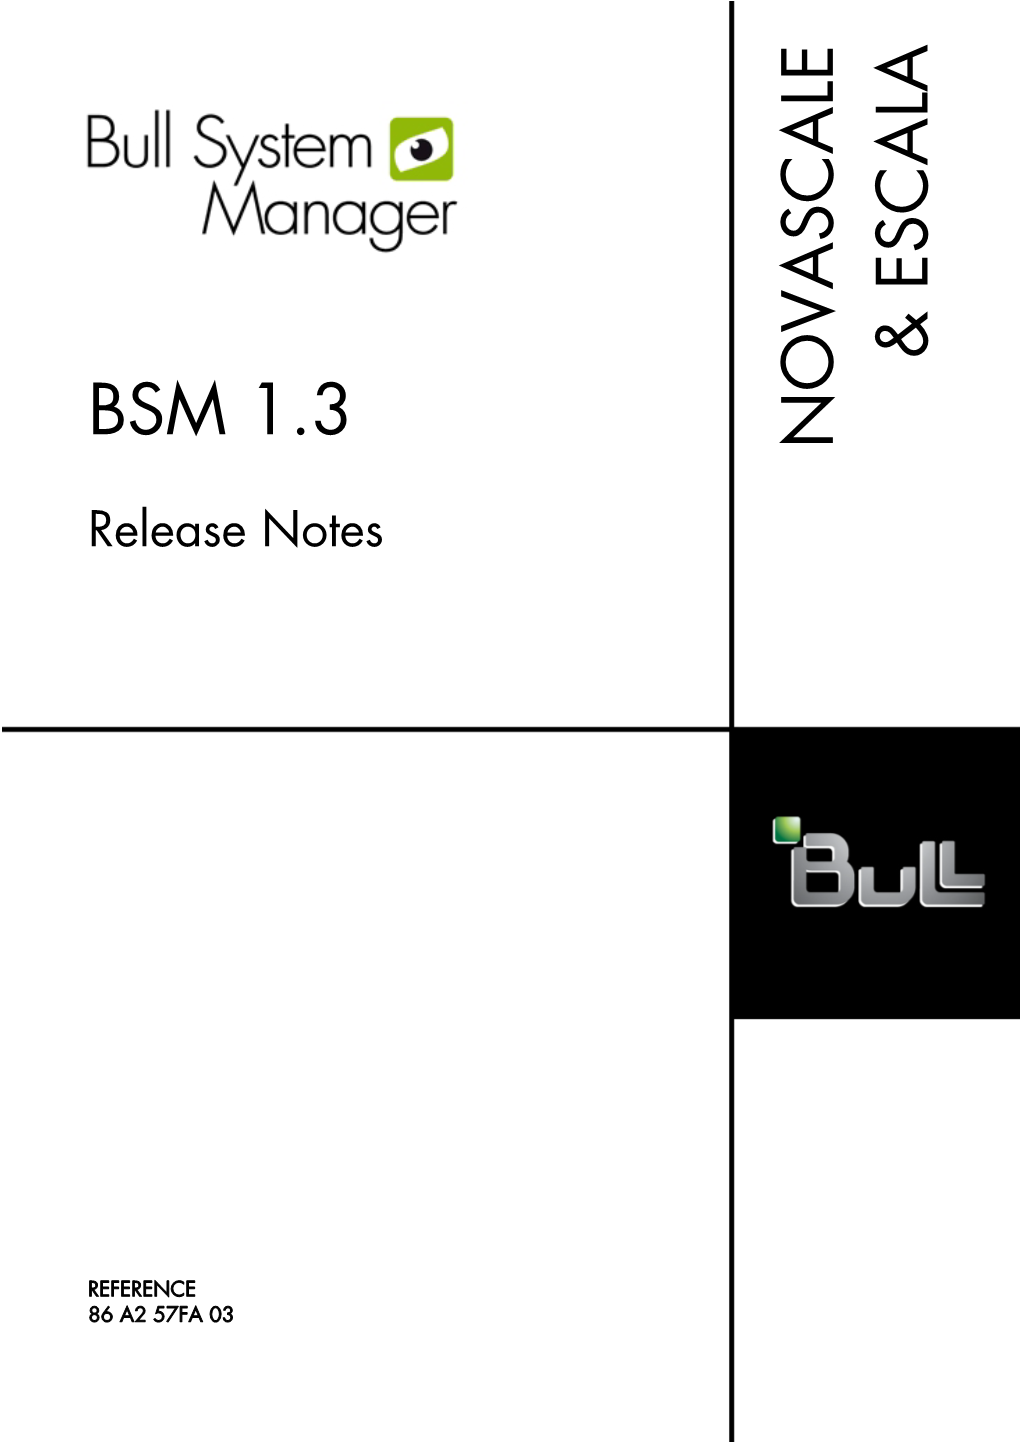 BSM 1.3 Release Notes